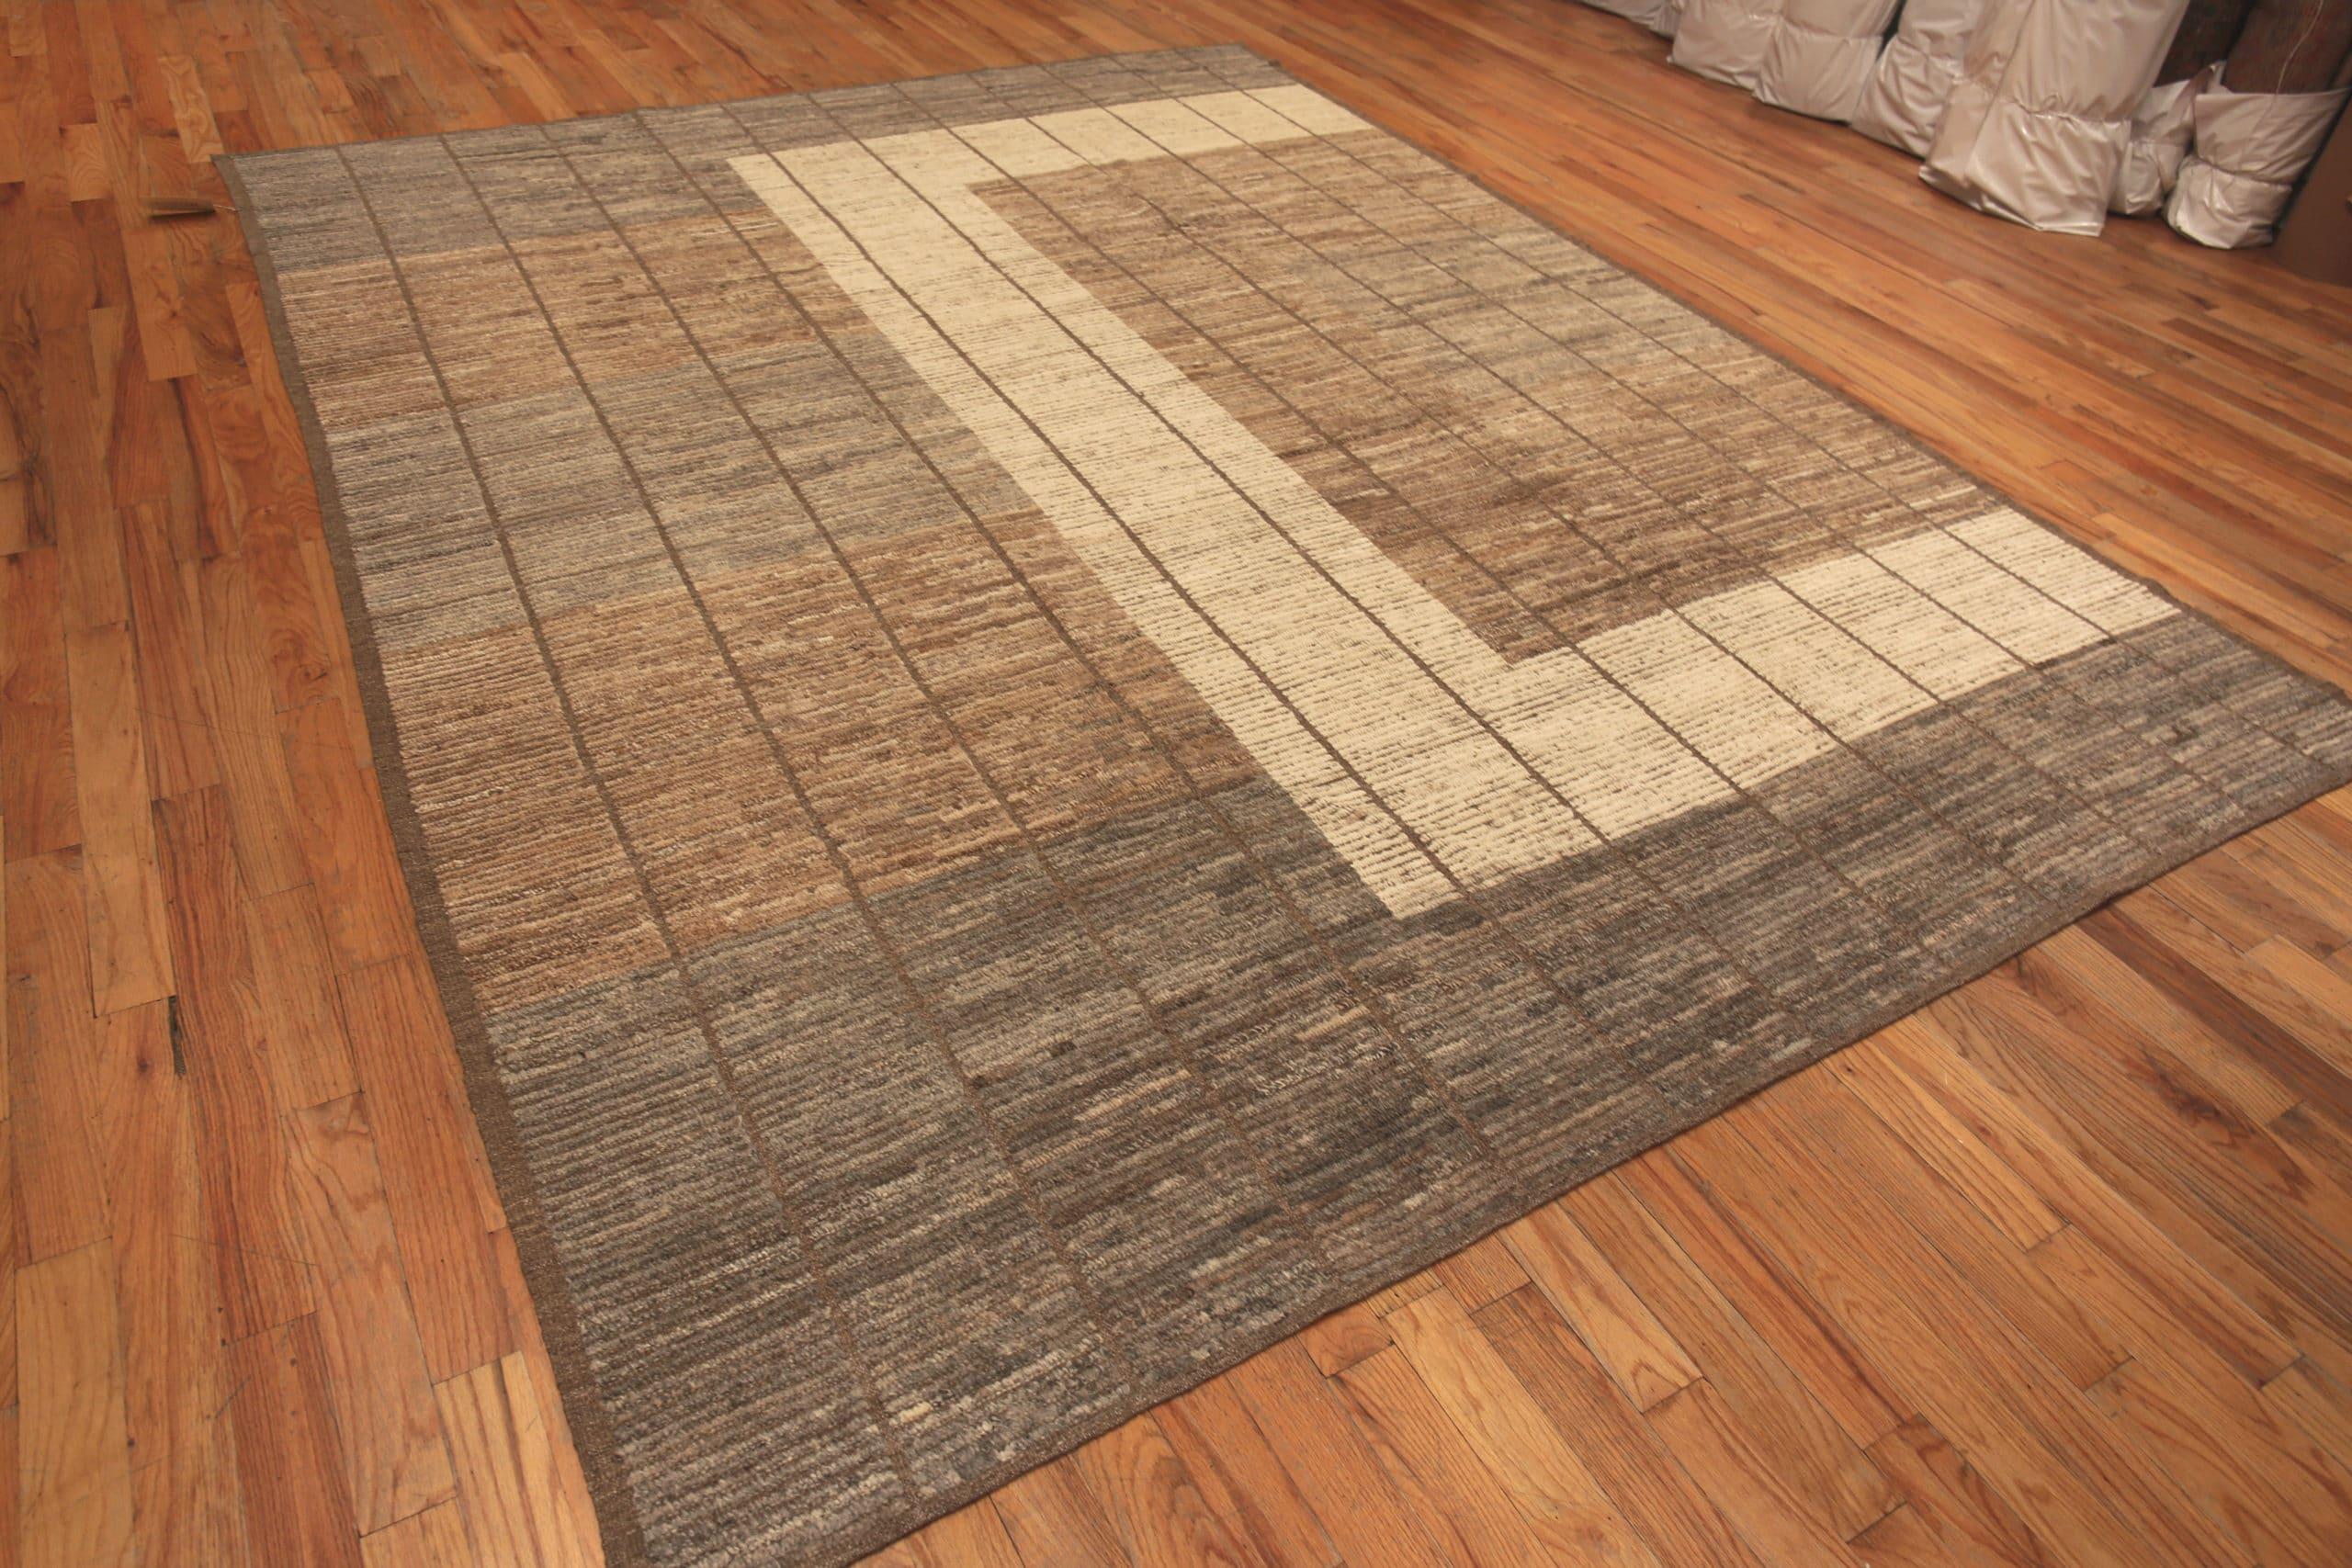 Nazmiyal Collection Earthy Tones Modern Decorative Rug. 9 ft 3 in x 12 ft In Good Condition For Sale In New York, NY